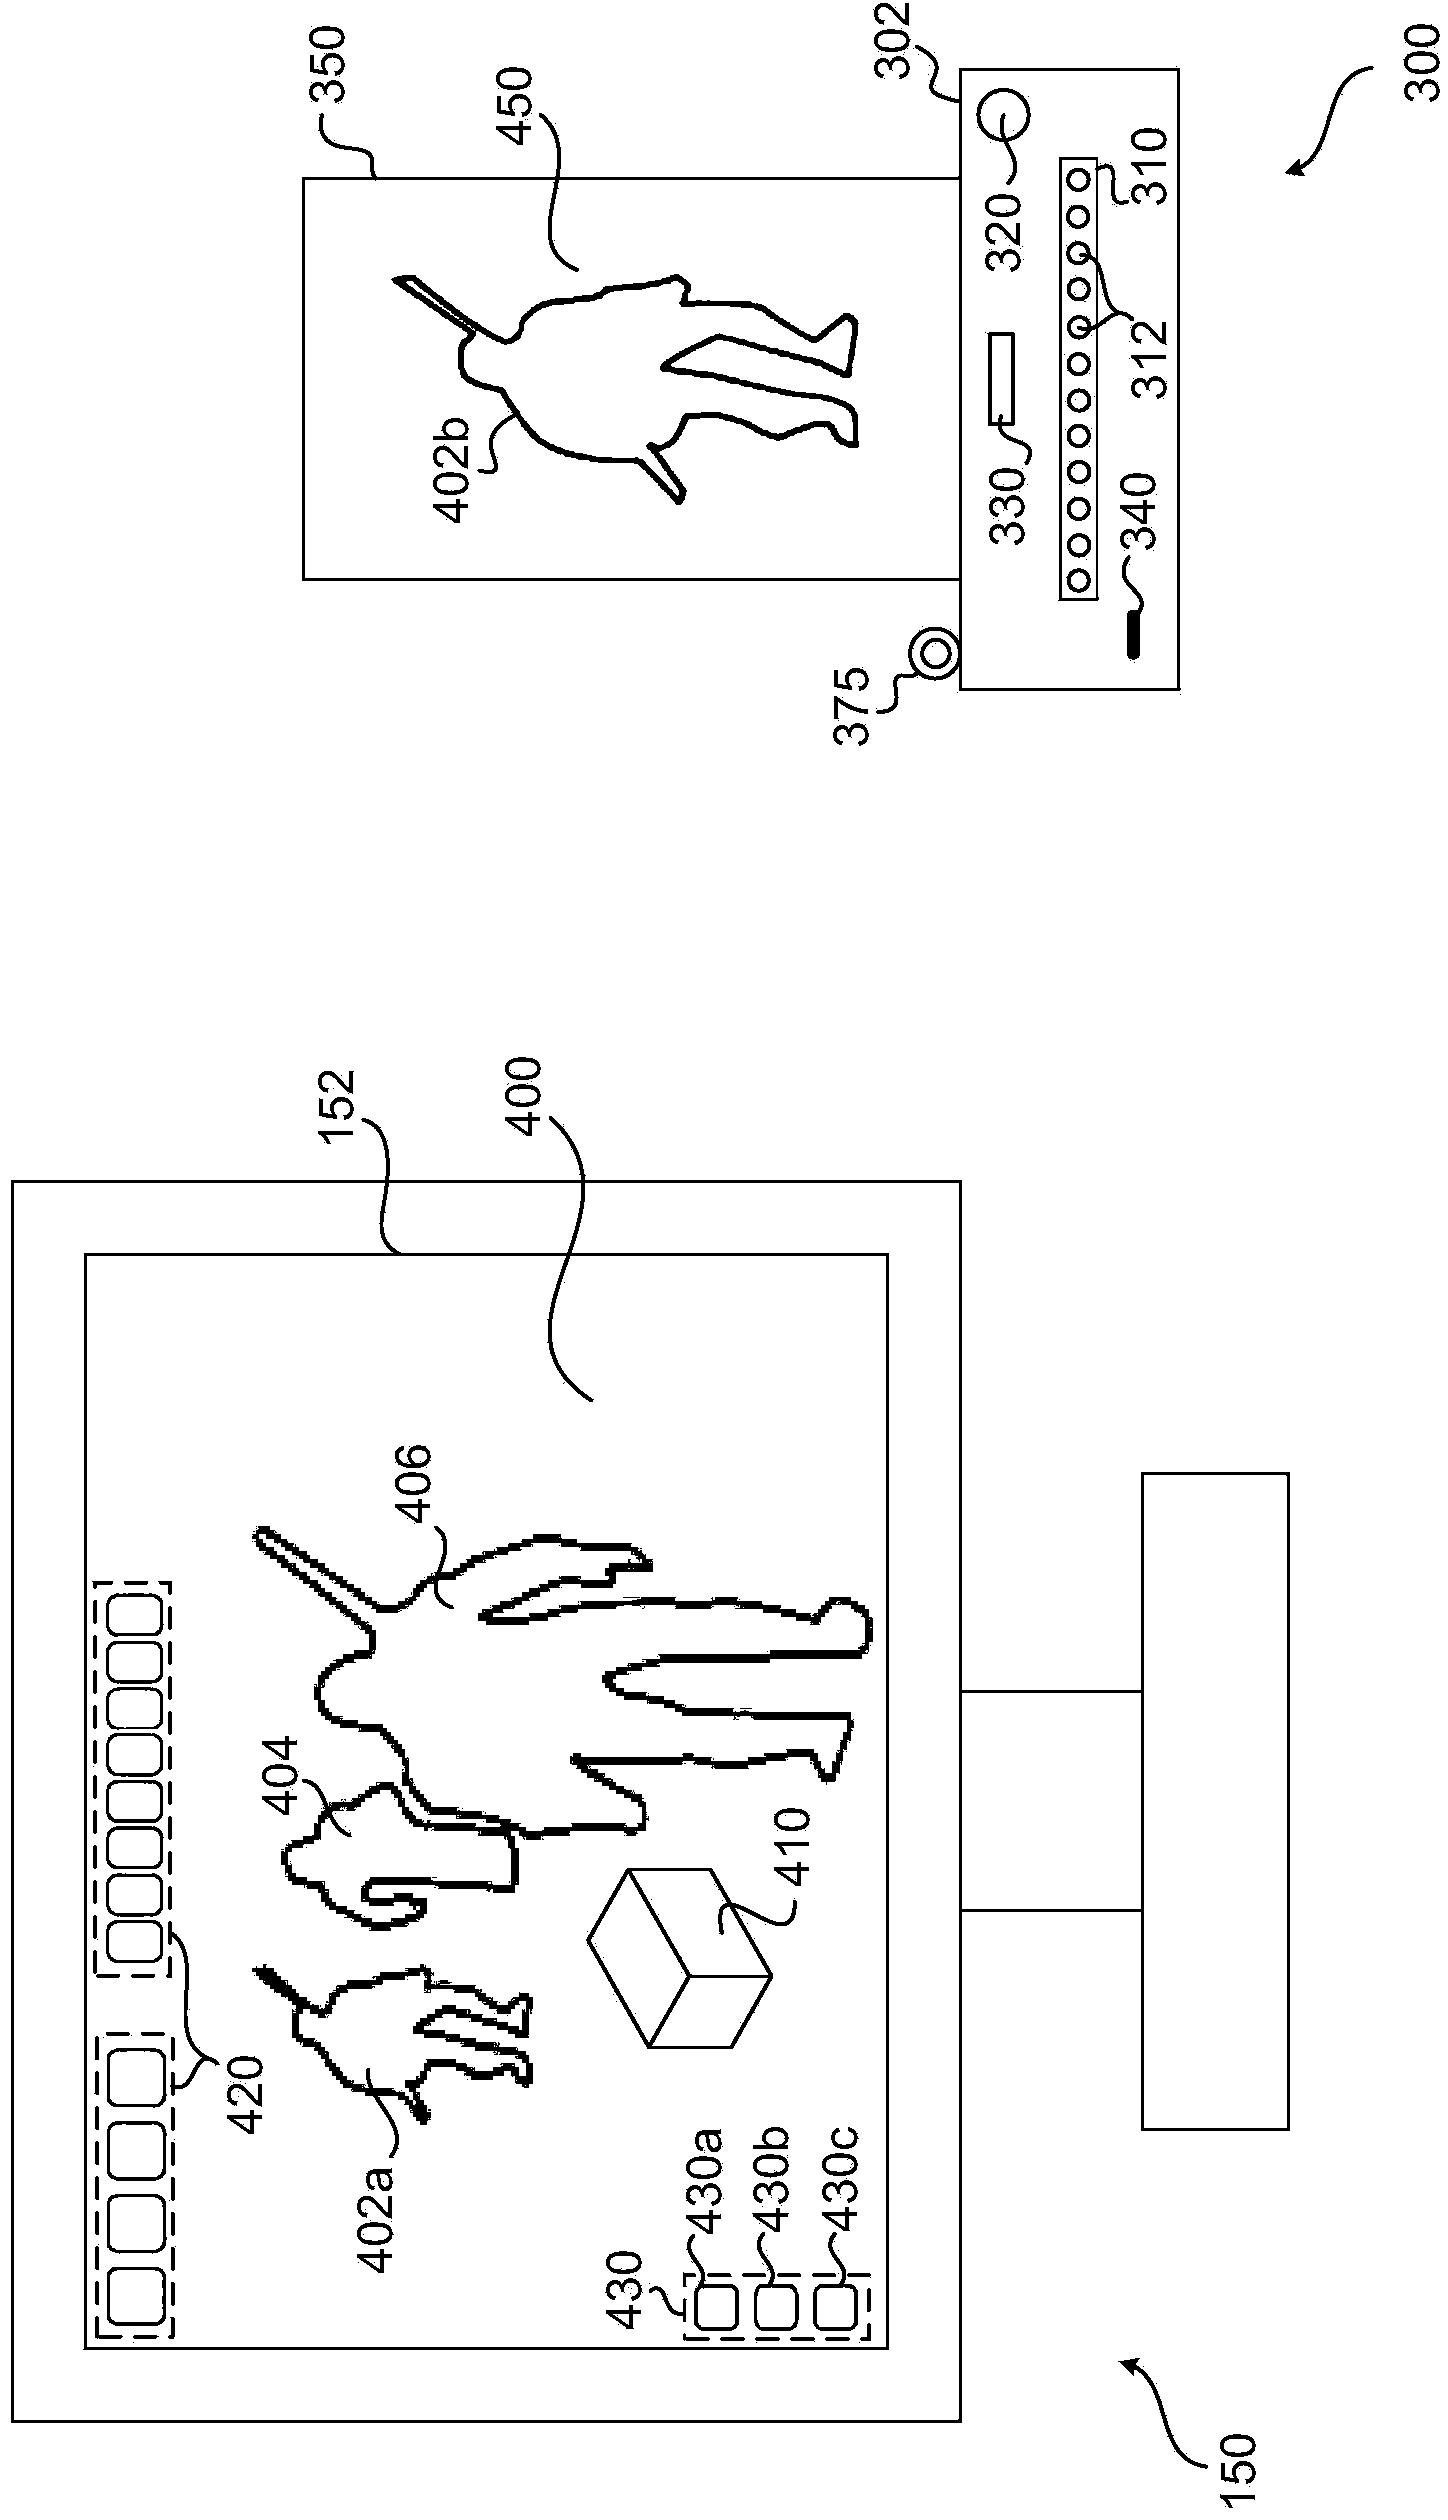 Computer peripheral display and communication device providing an adjunct 3D user interface